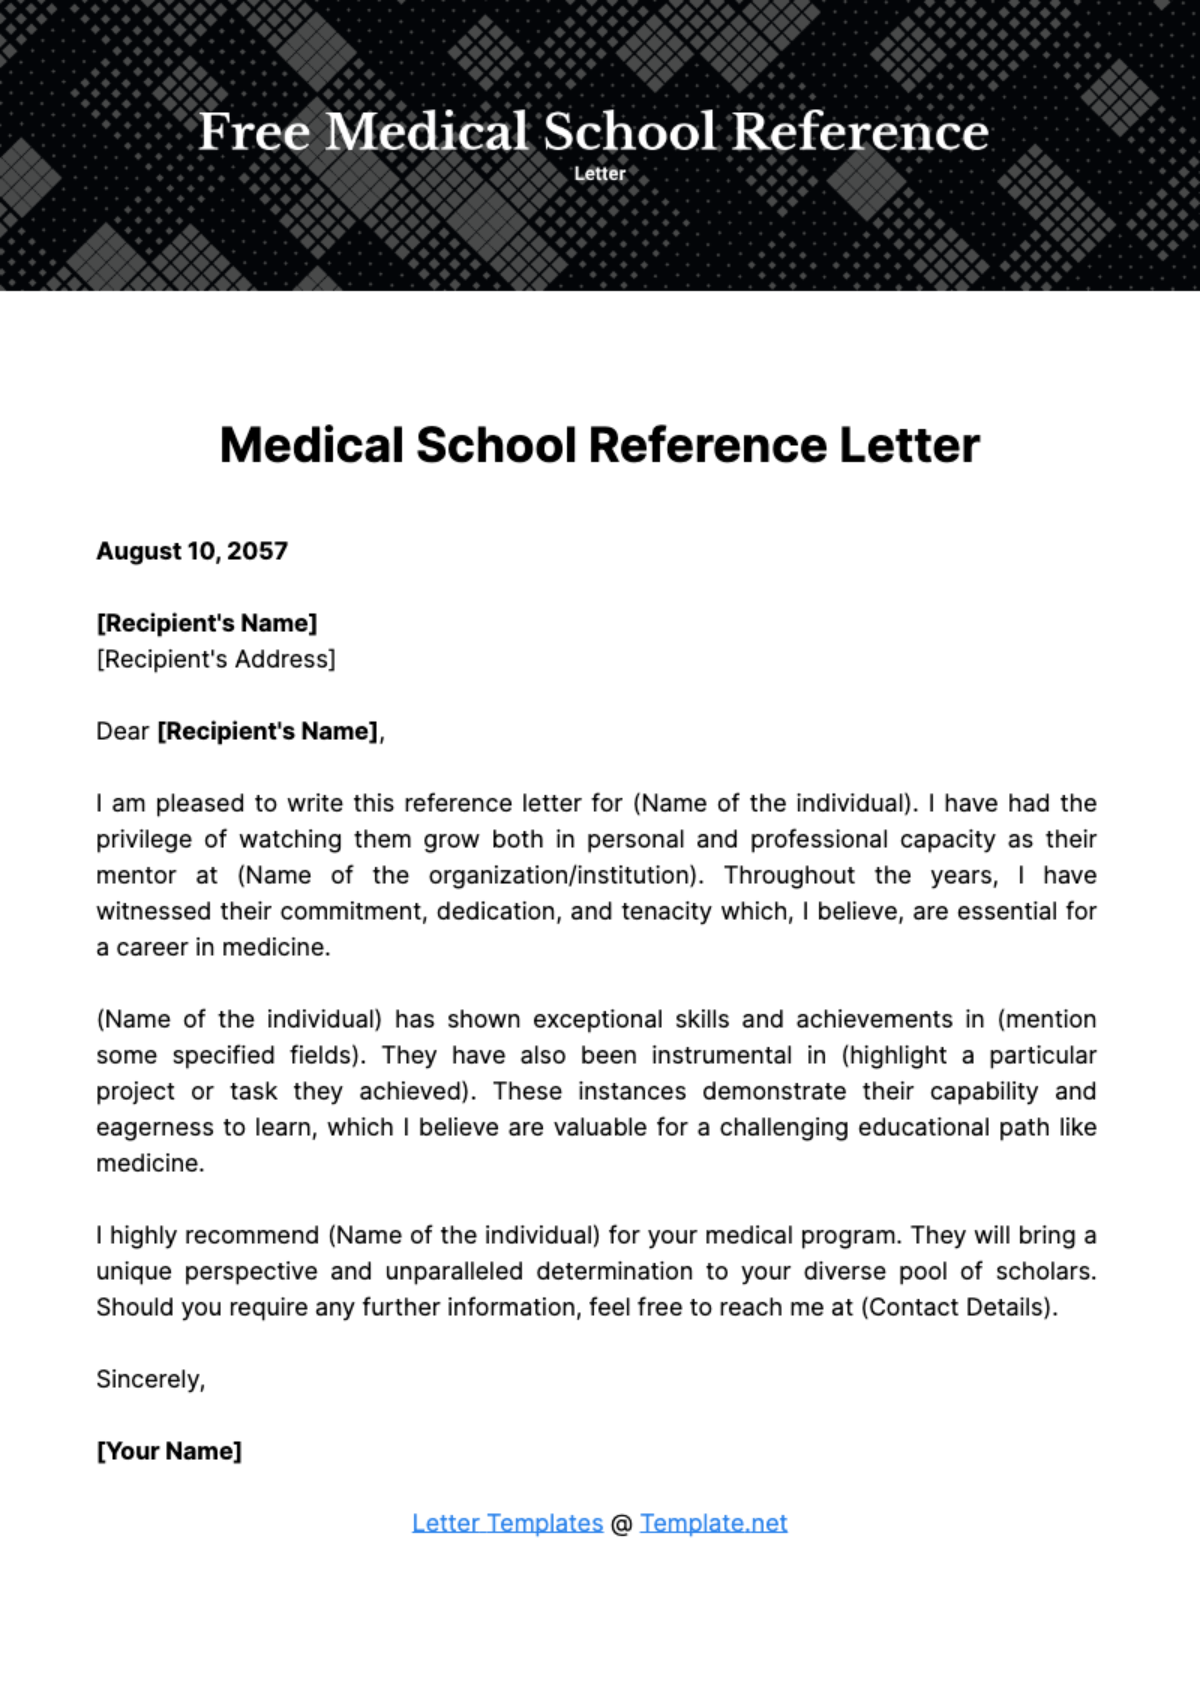 Free Medical School Reference Letter Template